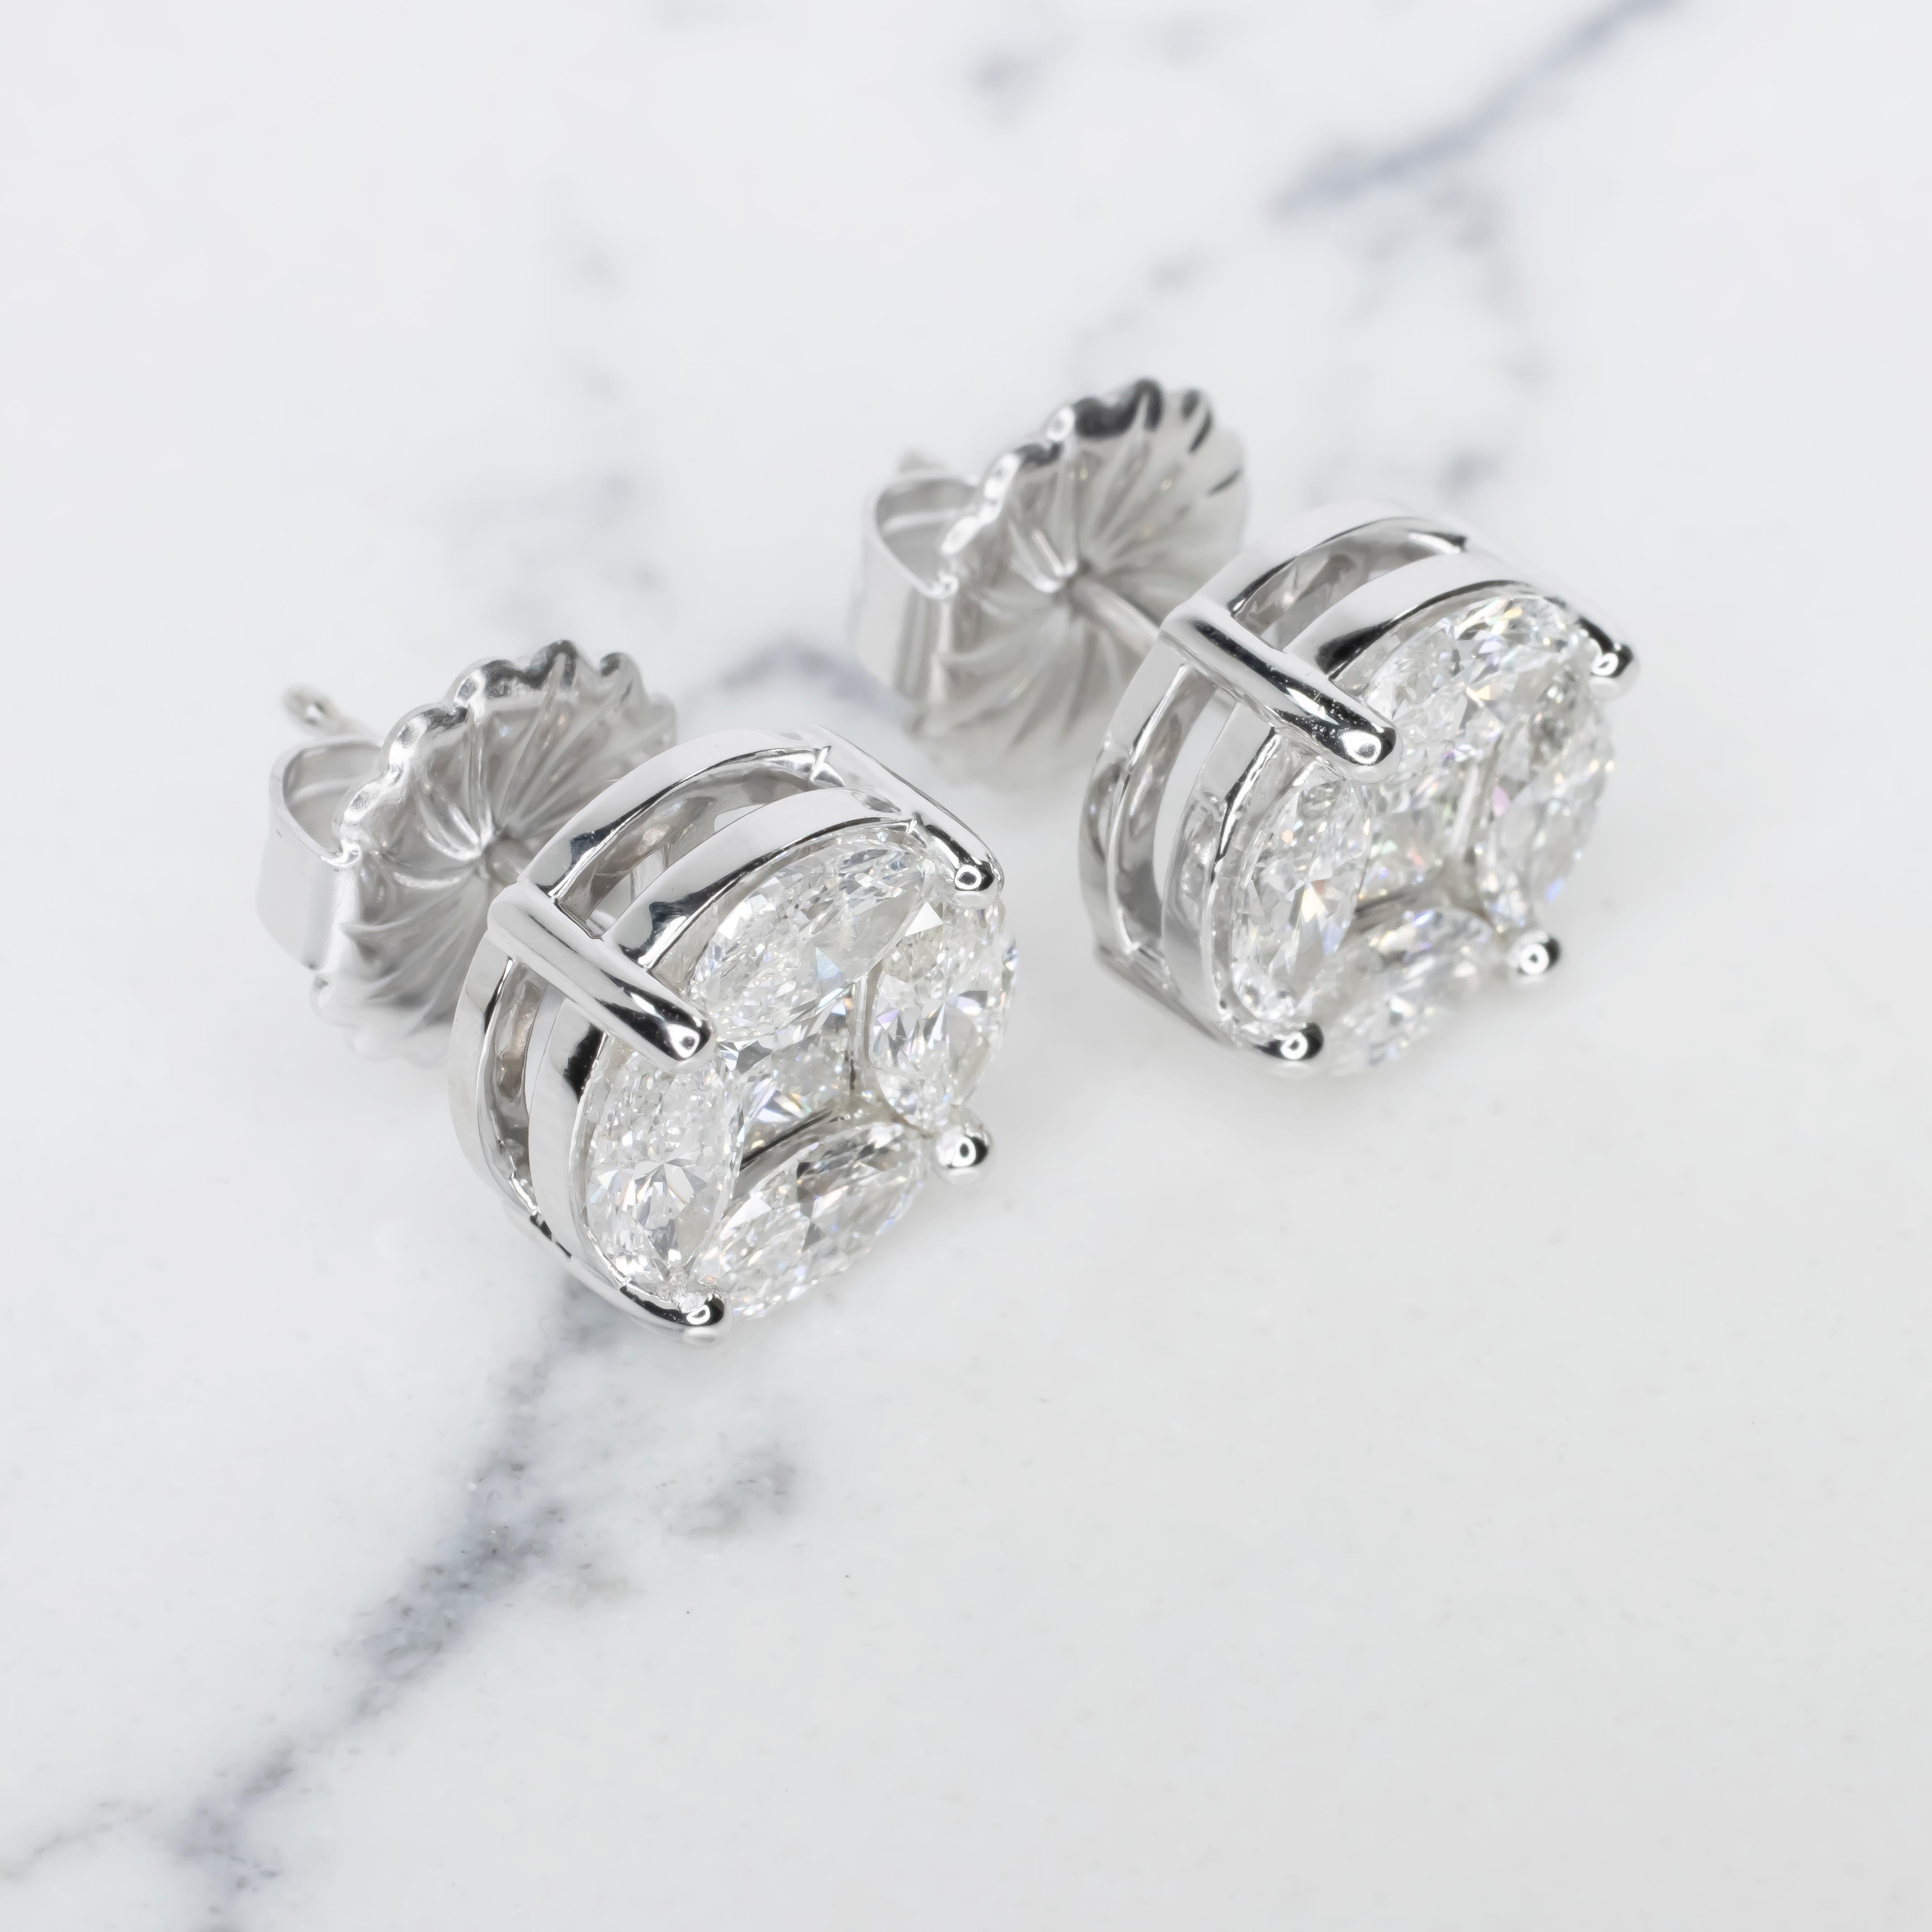 Elegance redefined: Introducing the Antinori Di Sanpietro 3 Carat Diamond Stud Earrings, a masterpiece of jewelry design. These studs are a testament to the exquisite craftsmanship synonymous with the Antinori Di Sanpietro name, renowned for